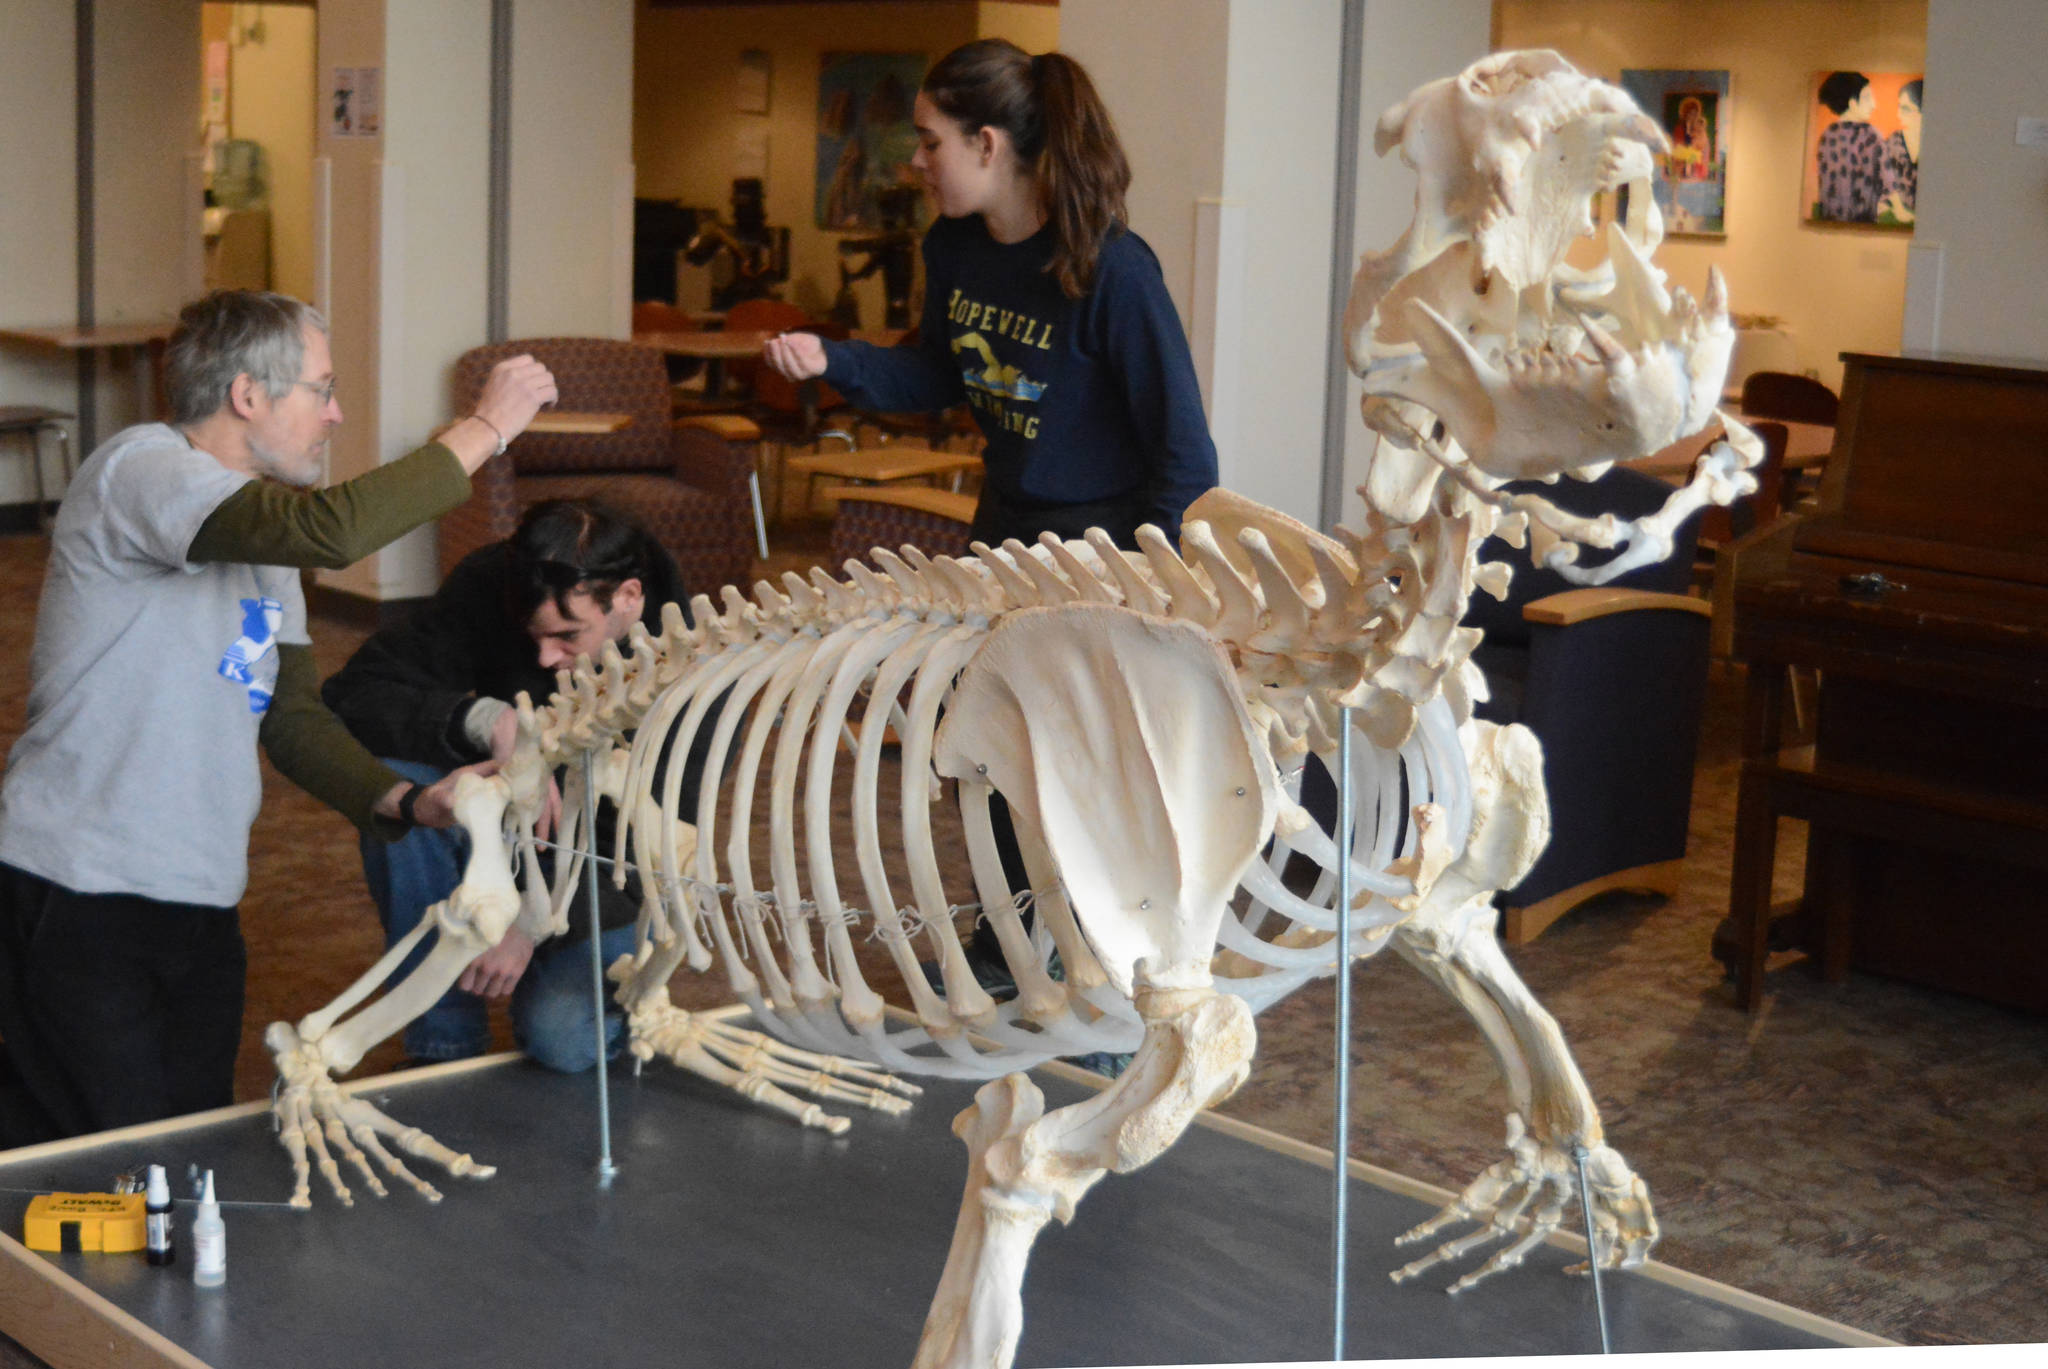 Lee Post, left, Kyle Cullum, center, and Nicole Webster, right, work on assembling the skeleton of Woody, a sea lion that lived at the Alaska SeaLife Center, Wednesday, Nov. 22, 2017 in Pioneer Hall of Kachemak Bay Campus in Homer, Alaska. Cullum and Webster were students in Post’s Marine Skeleton Articulation class and helped put together the skeleton of Woody. (Photo by Michael Armstrong, Homer News)